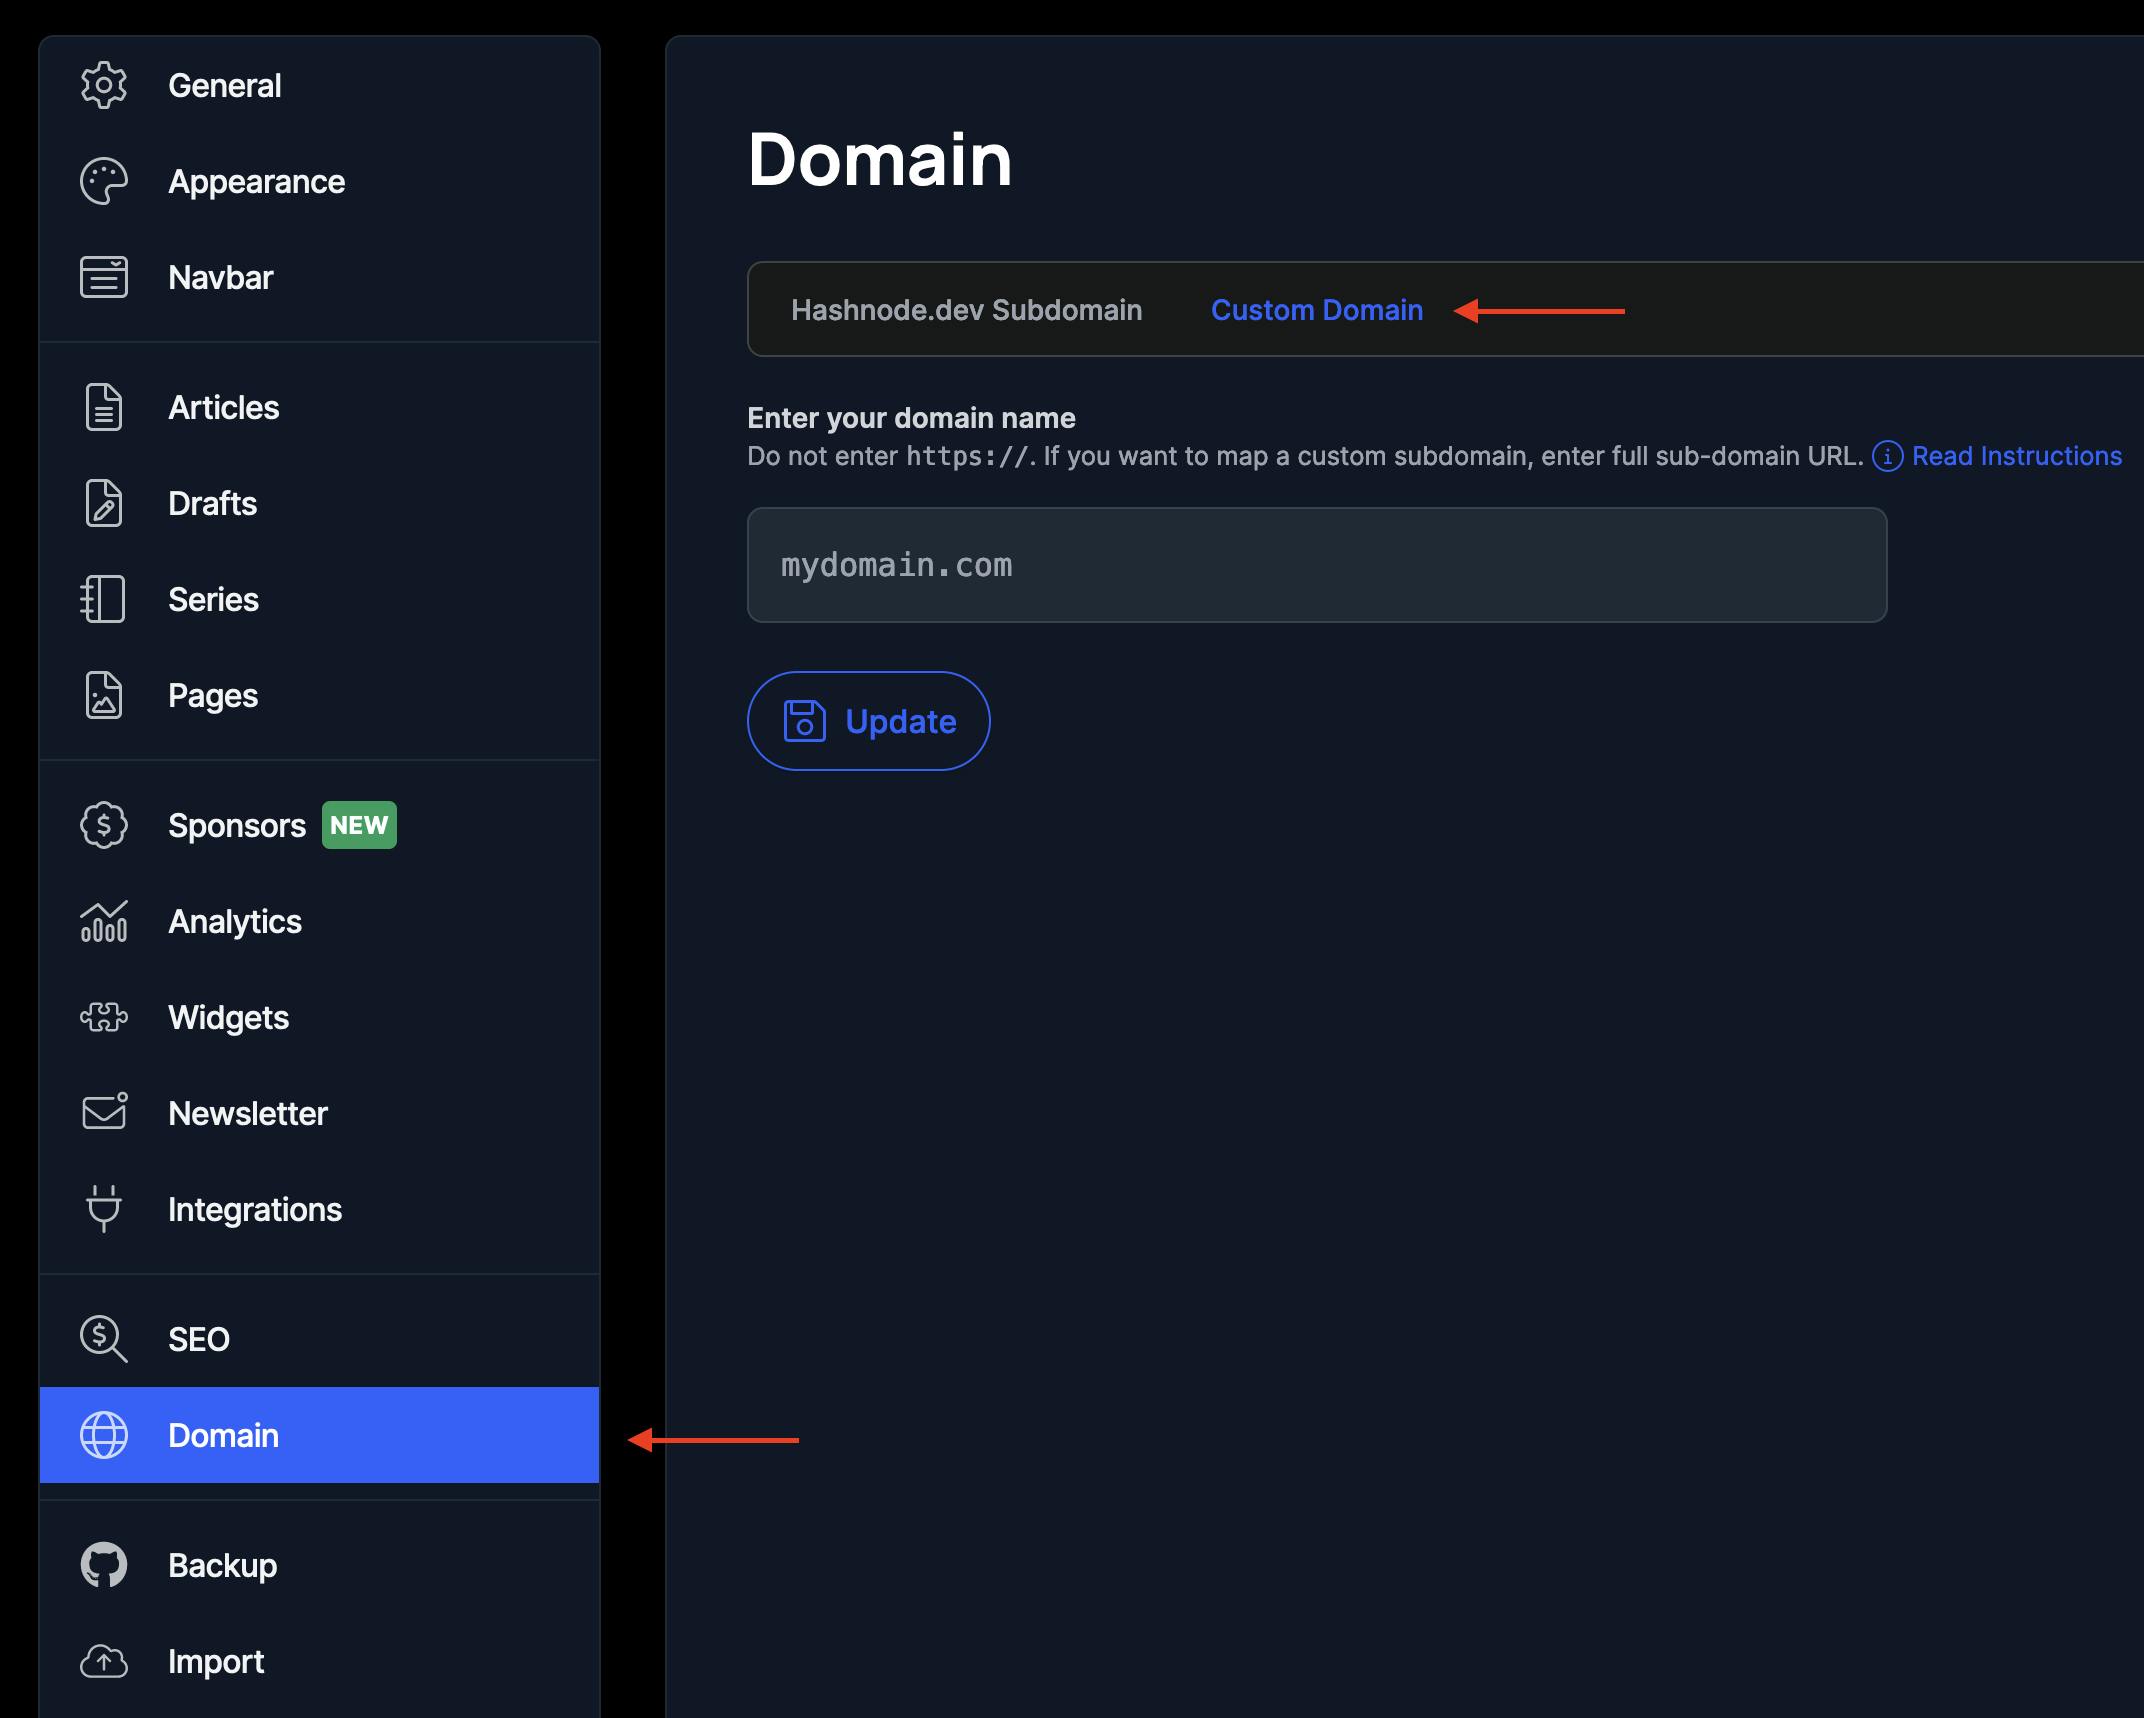 Hashnode blog dashboard with arrows to arrows to show the click path to the custom domain settings